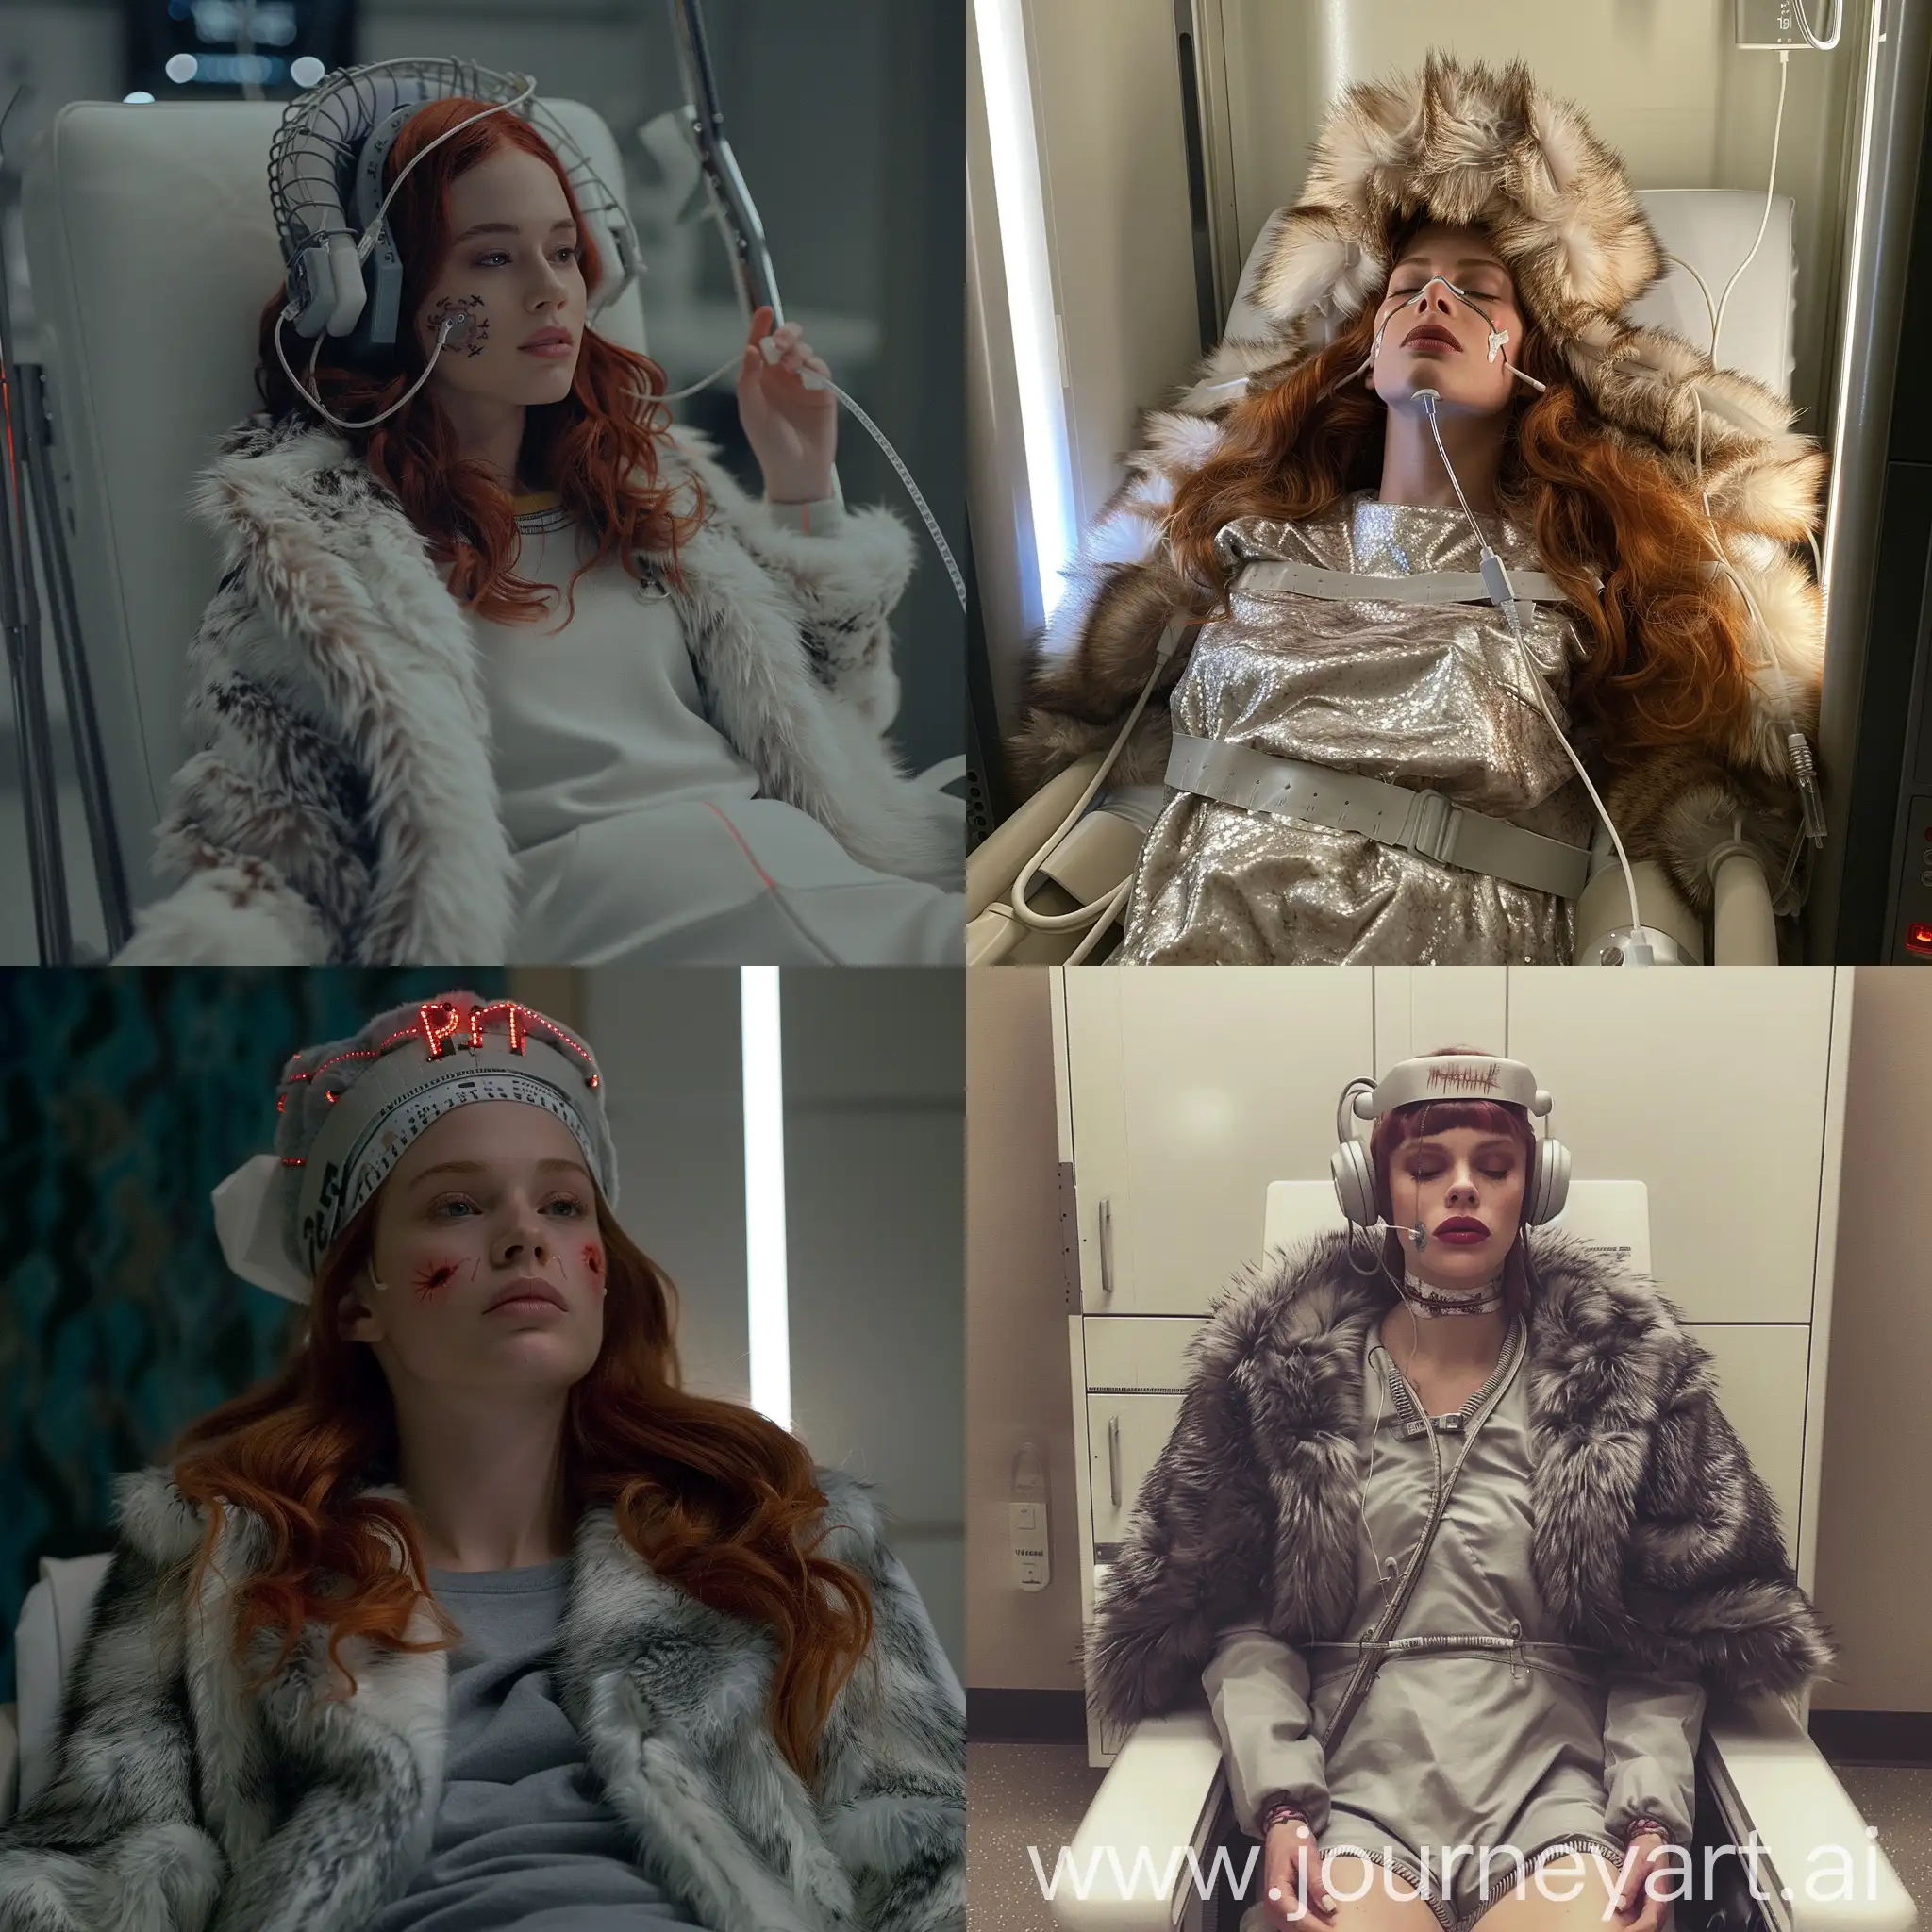 Madelaine Petsch wearing fur medical patient outfit undergoing Electroconvulsive Therapy